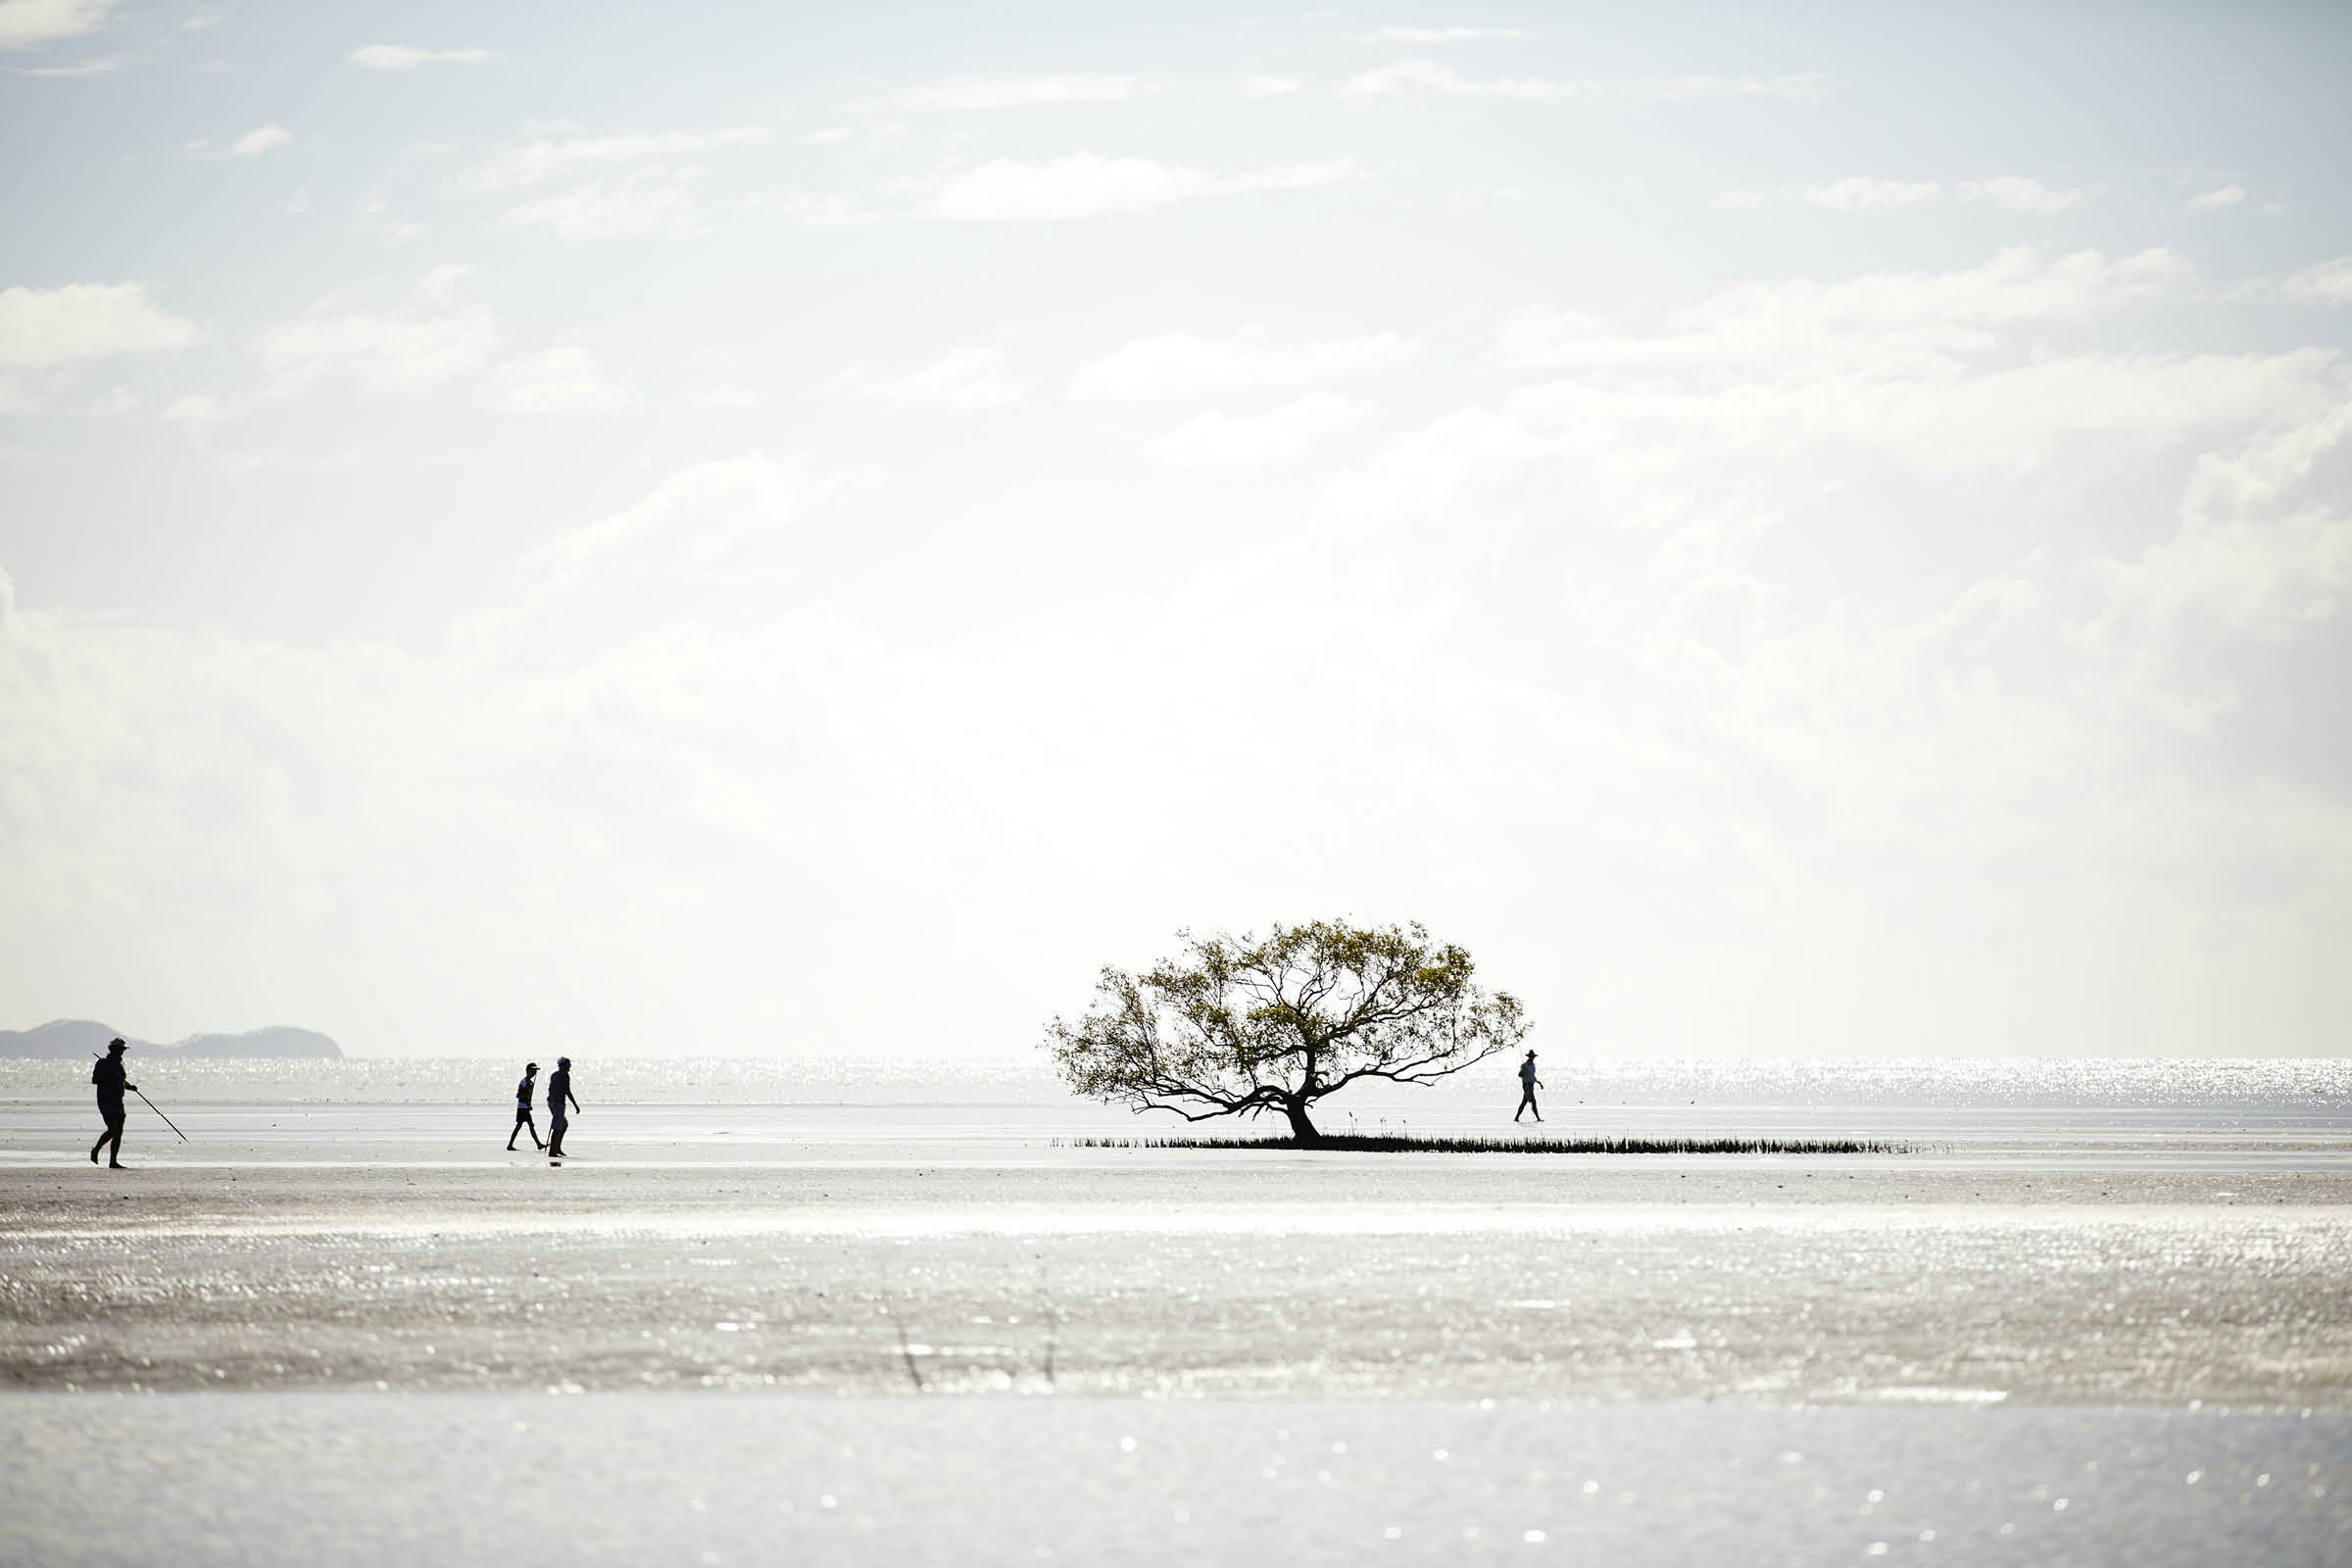 Crabbers walk with their poles around a single tree on Cooya Beach